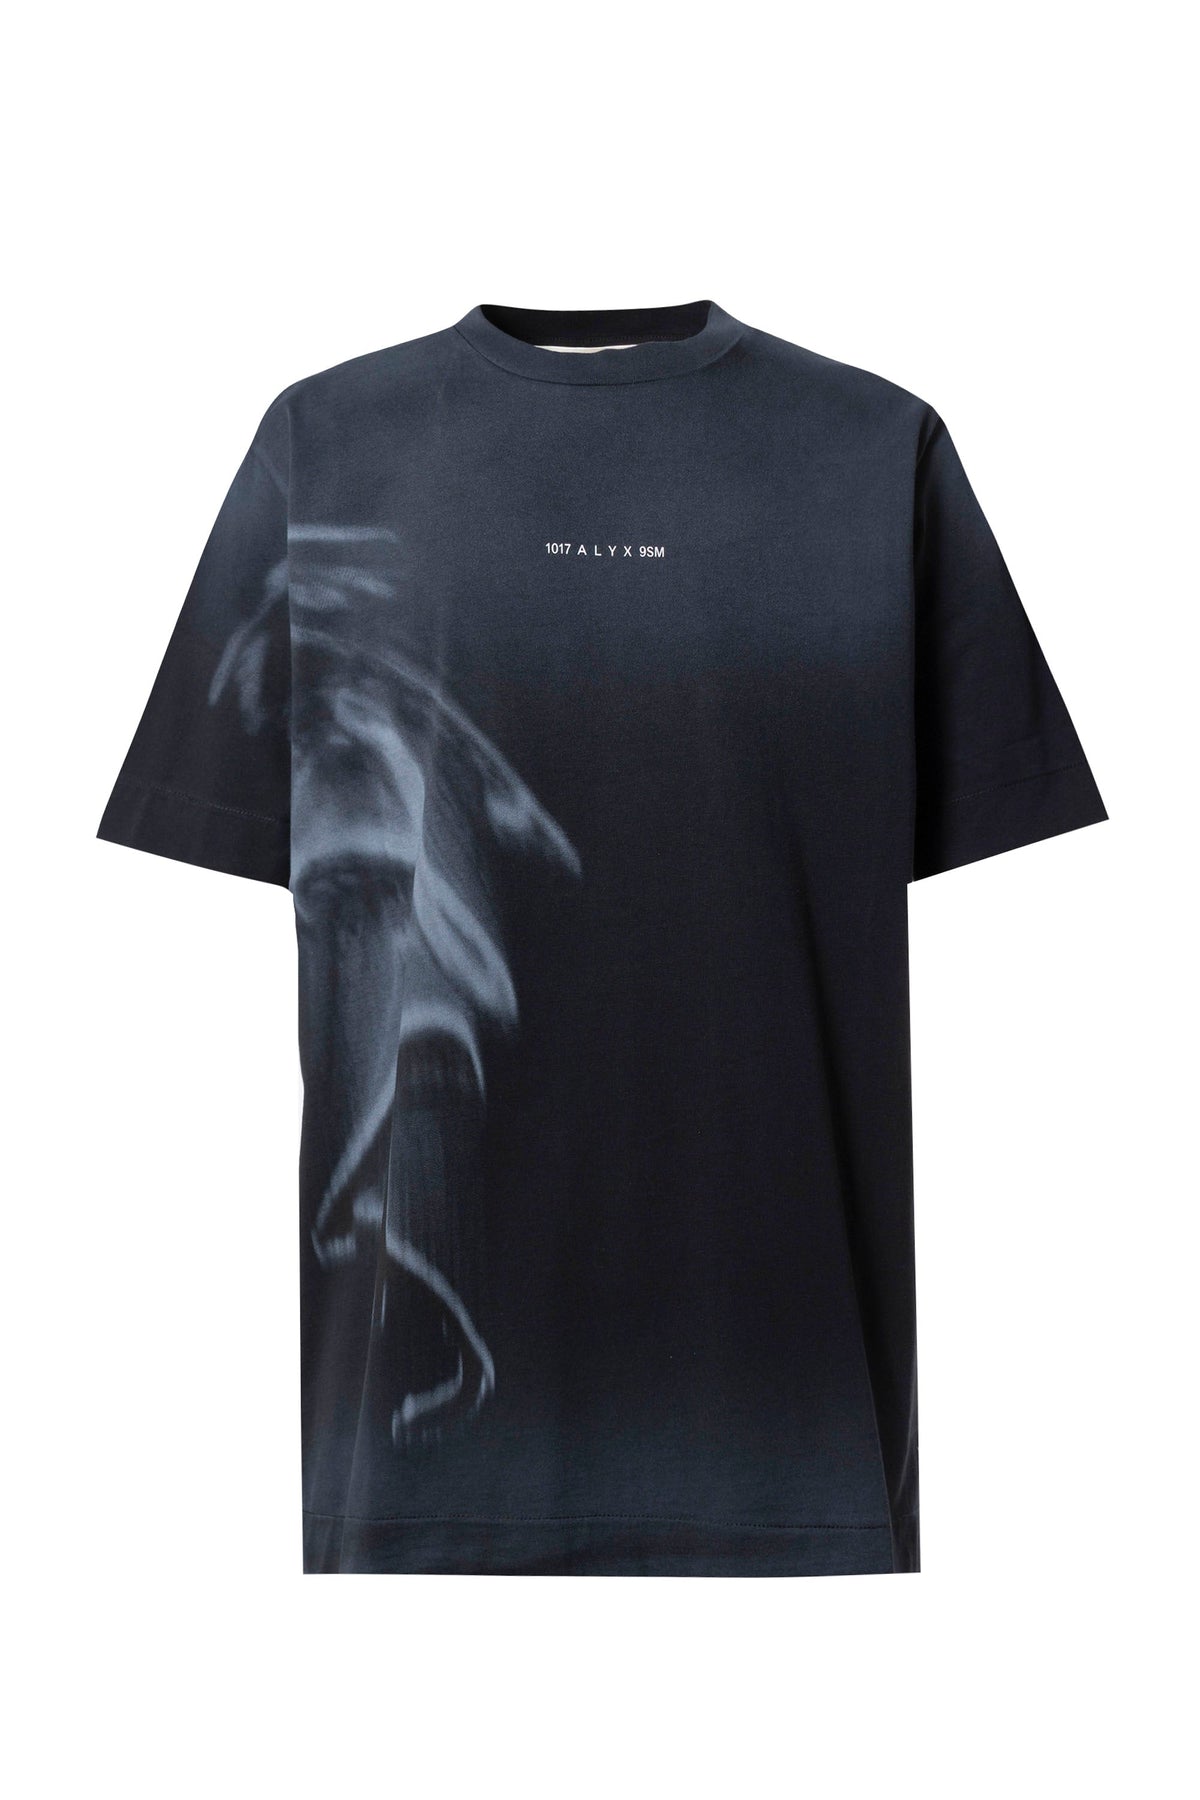 GRAPHIC S/S T-SHIRT / BLK